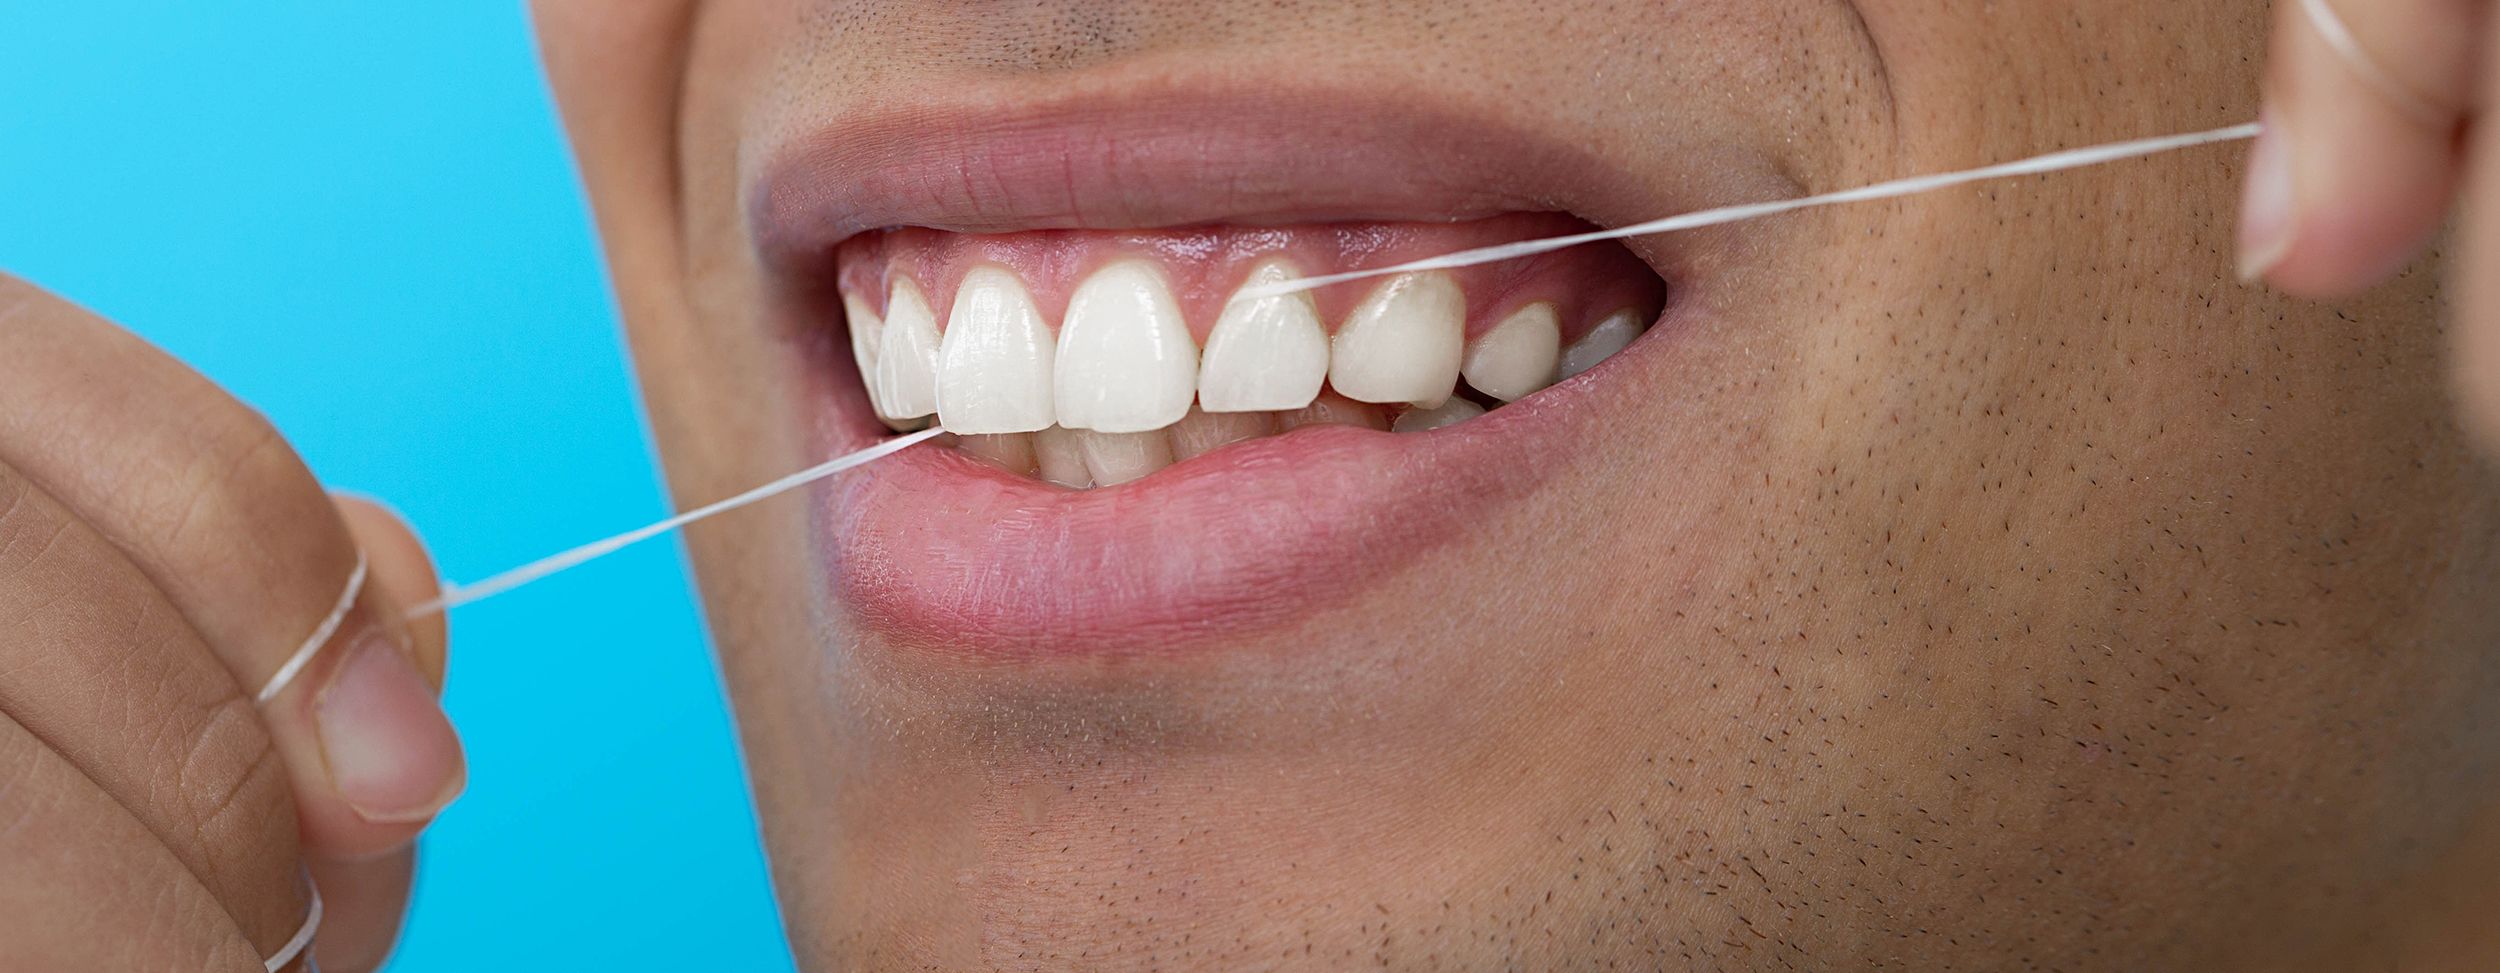 Ru Forekomme lave et eksperiment Flossing your teeth may protect against cognitive decline, research shows |  CNN